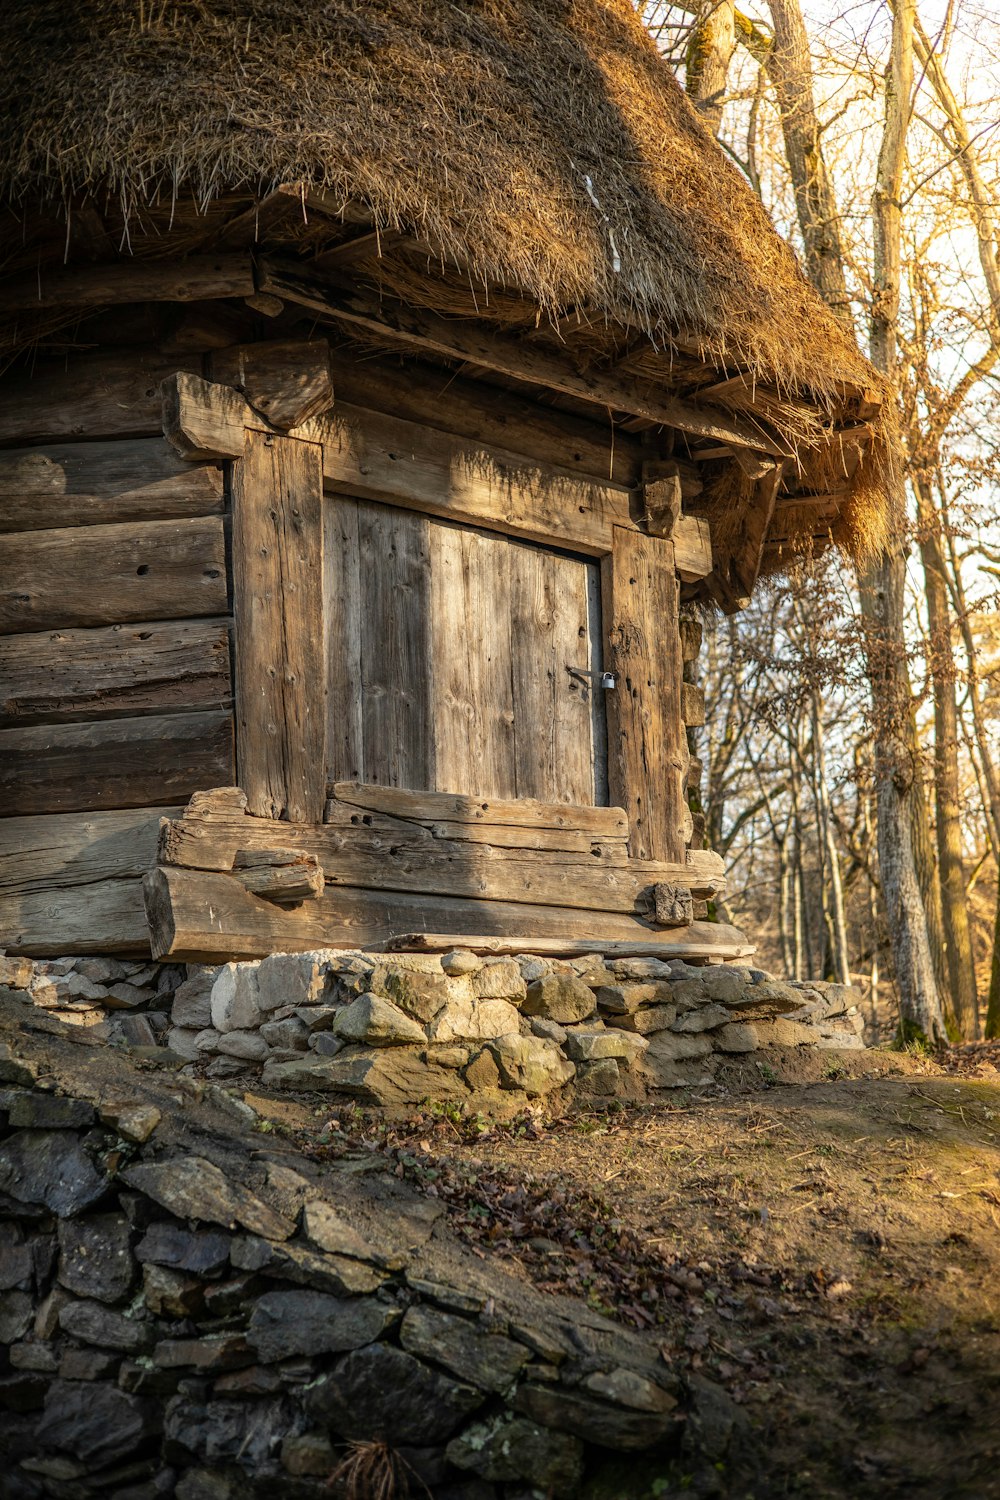 an old log cabin with a thatched roof